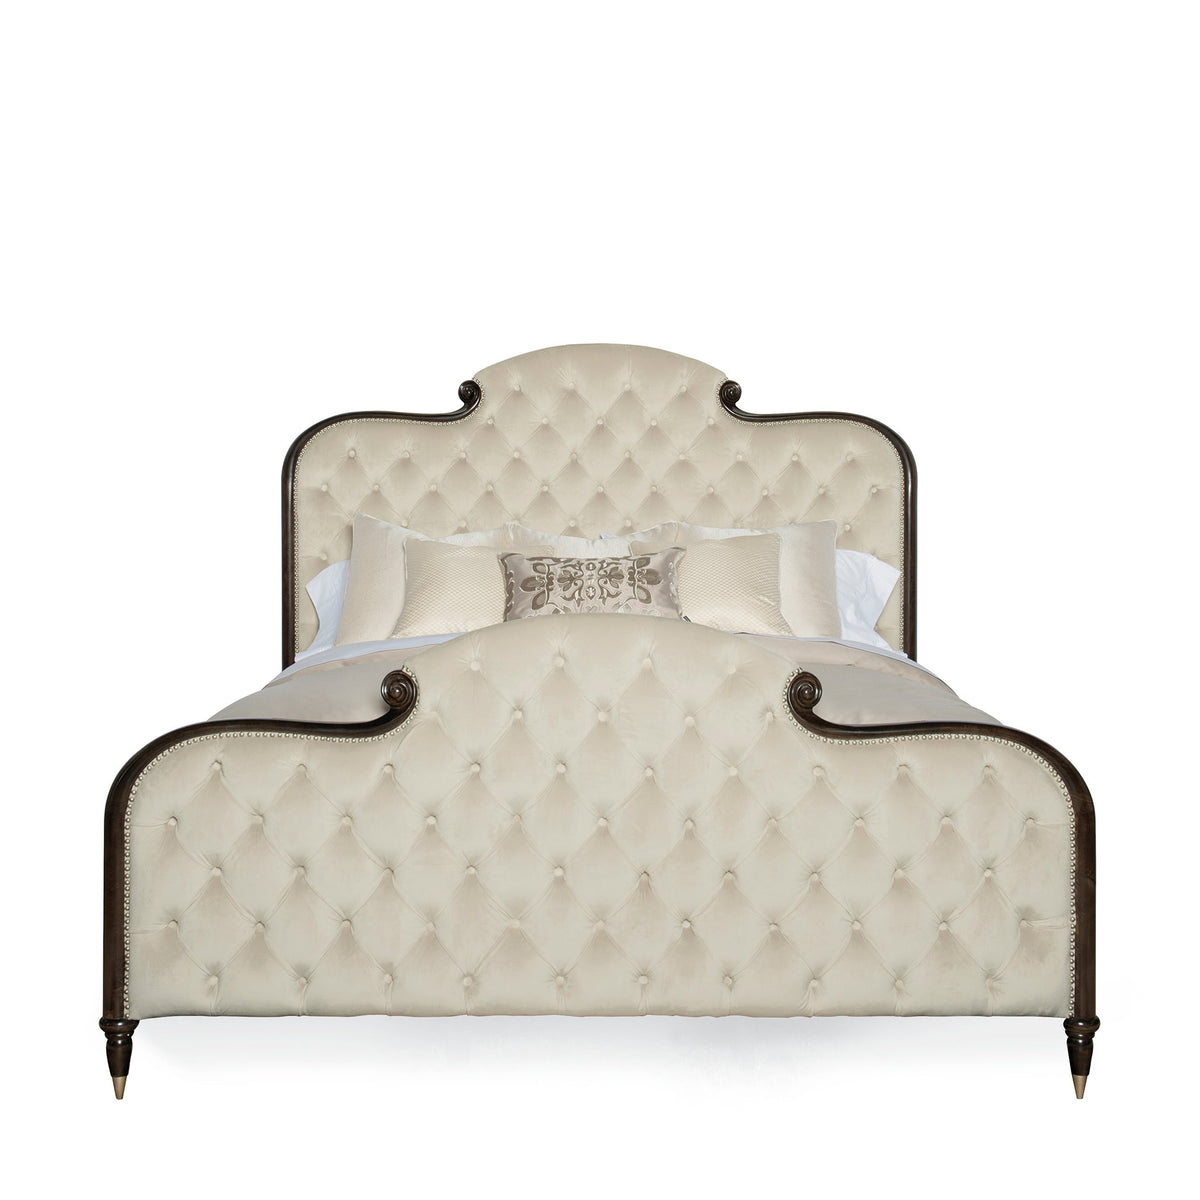 EVERLY QUEEN BED